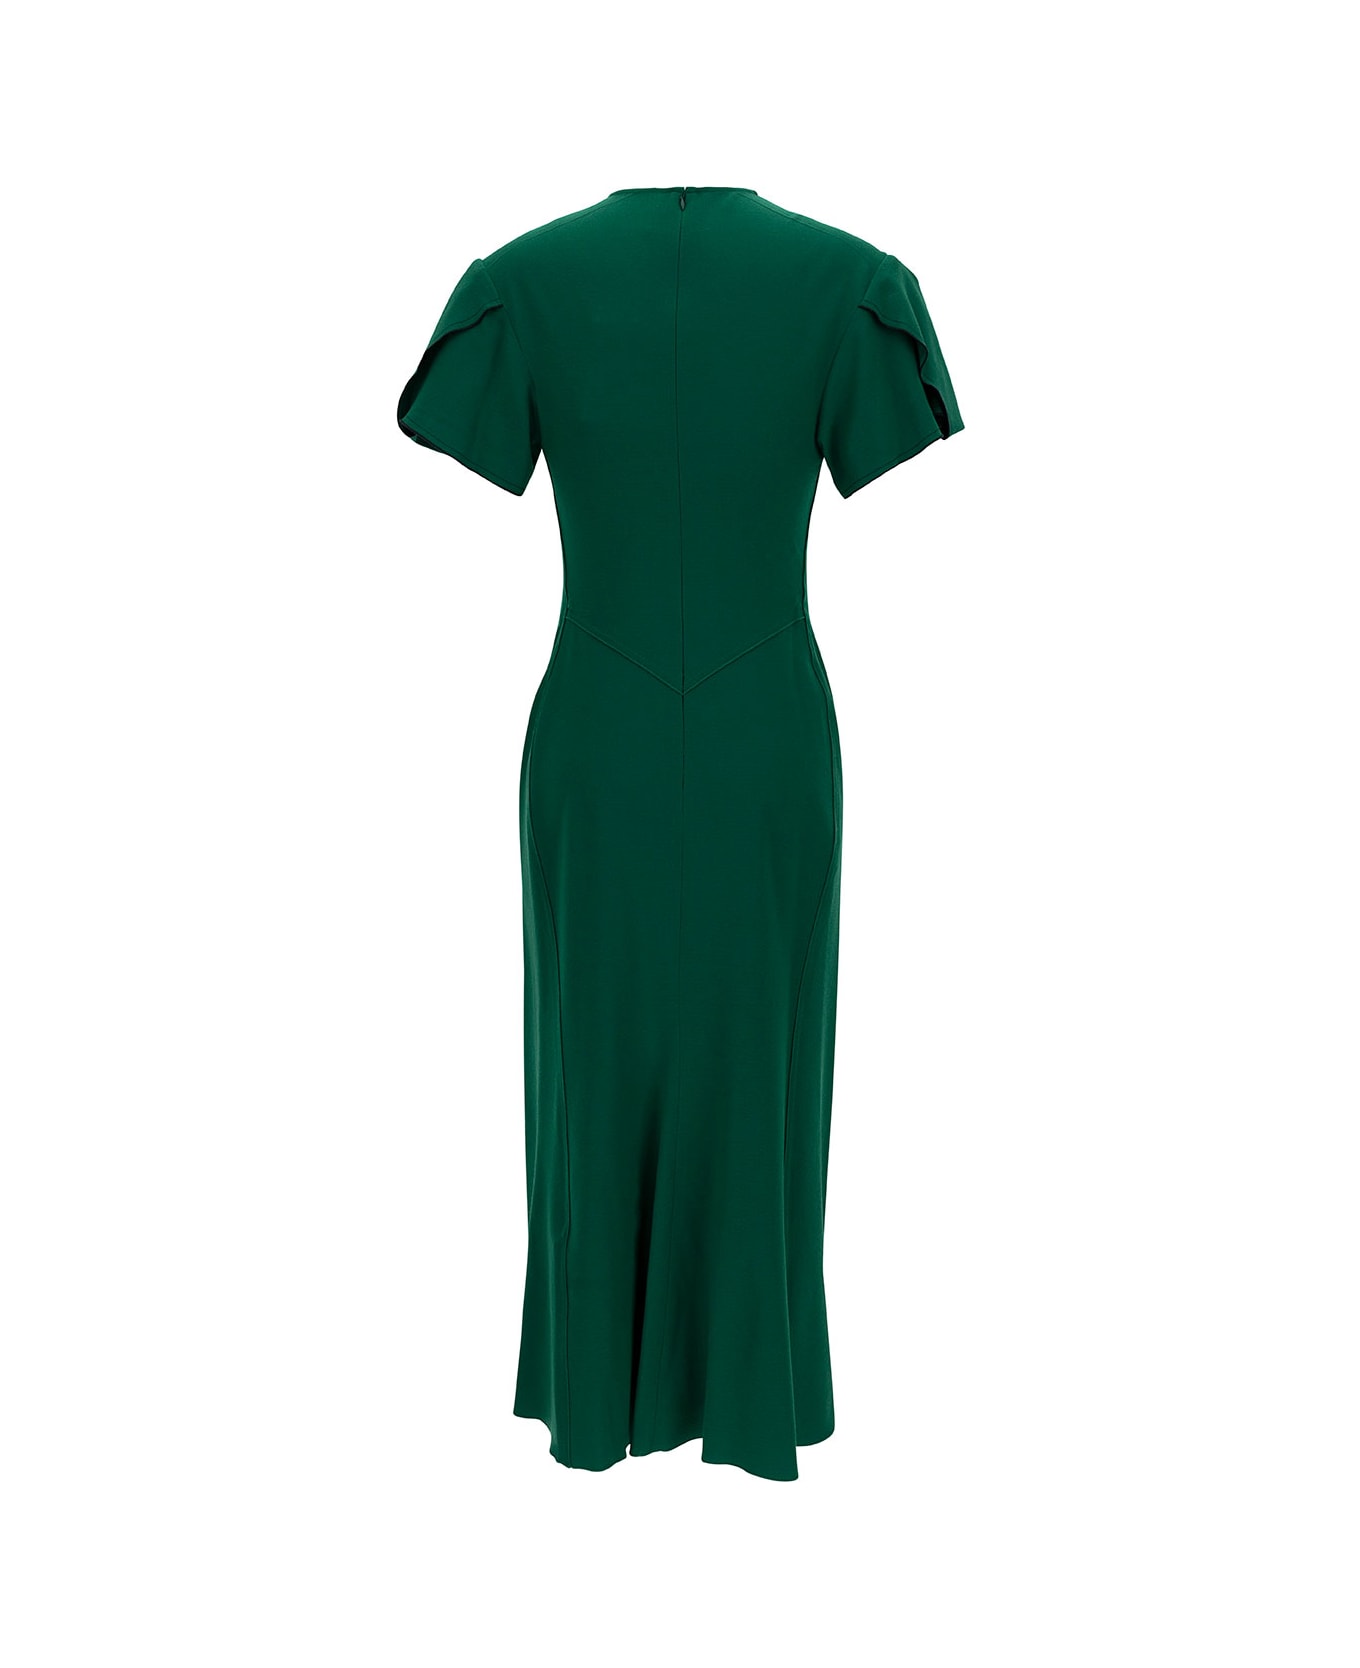 Victoria Beckham Midi Green Dress With Gatherings In Wool Blend Woman - Green ワンピース＆ドレス